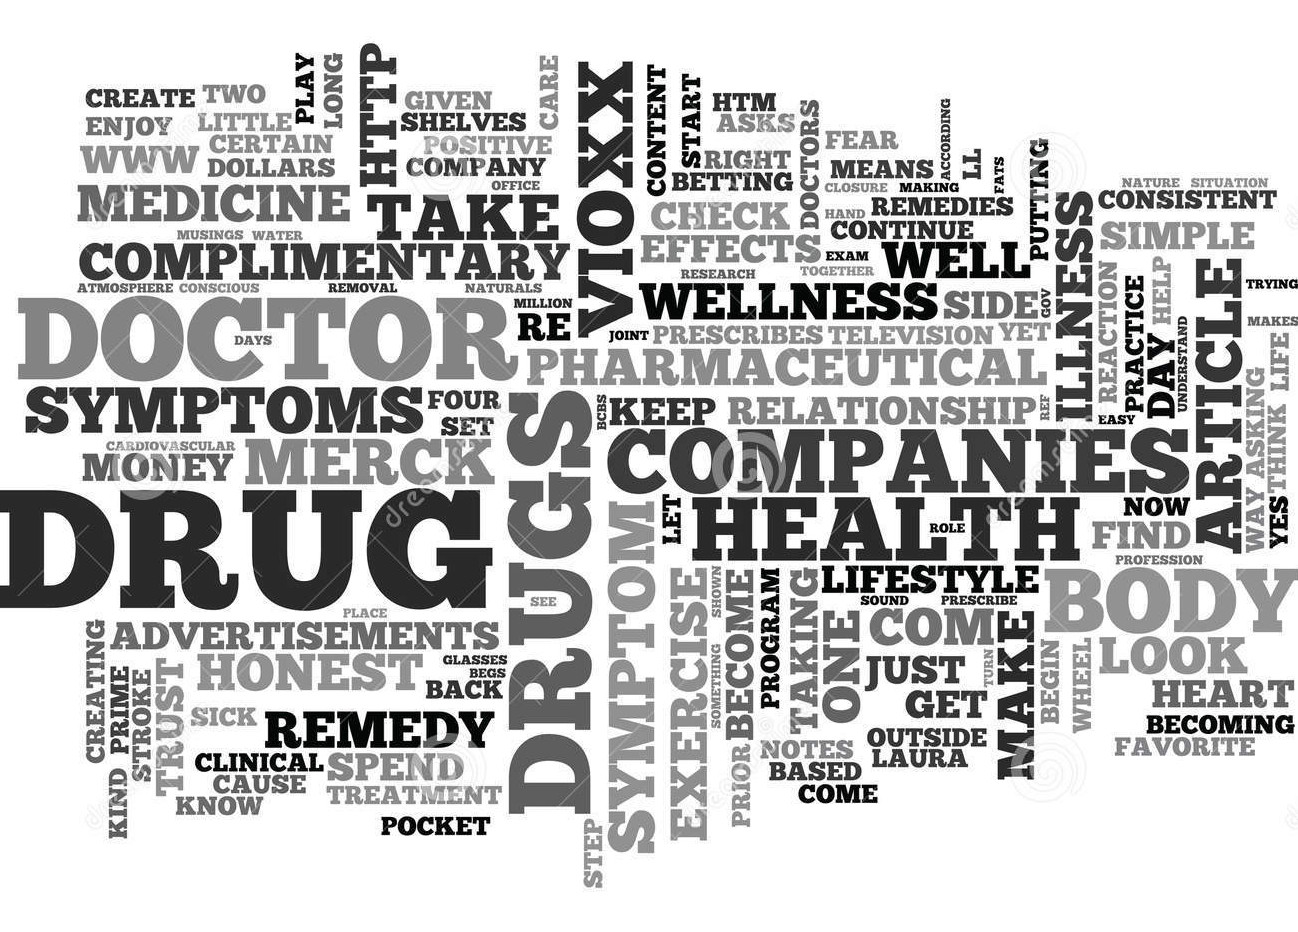 why-drug-companies-naughty-remedies-to-cure-symptoms-word-cloud-text-concept-96615272.jpg